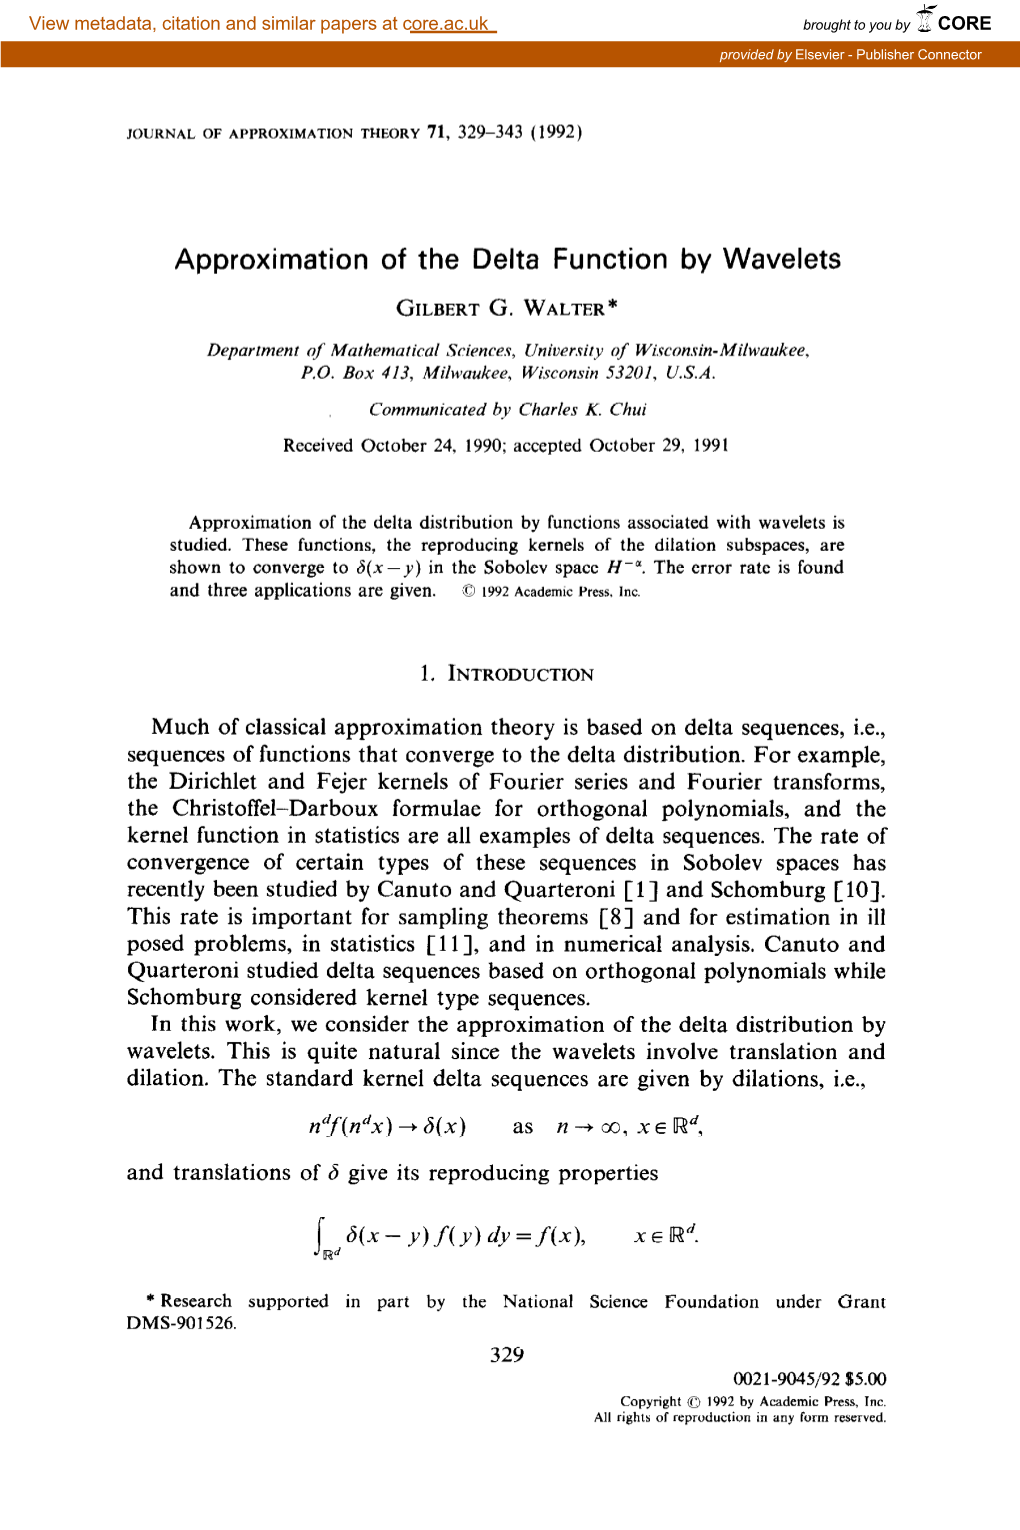 Approximation of the Delta Function by Wavelets GILBERT G